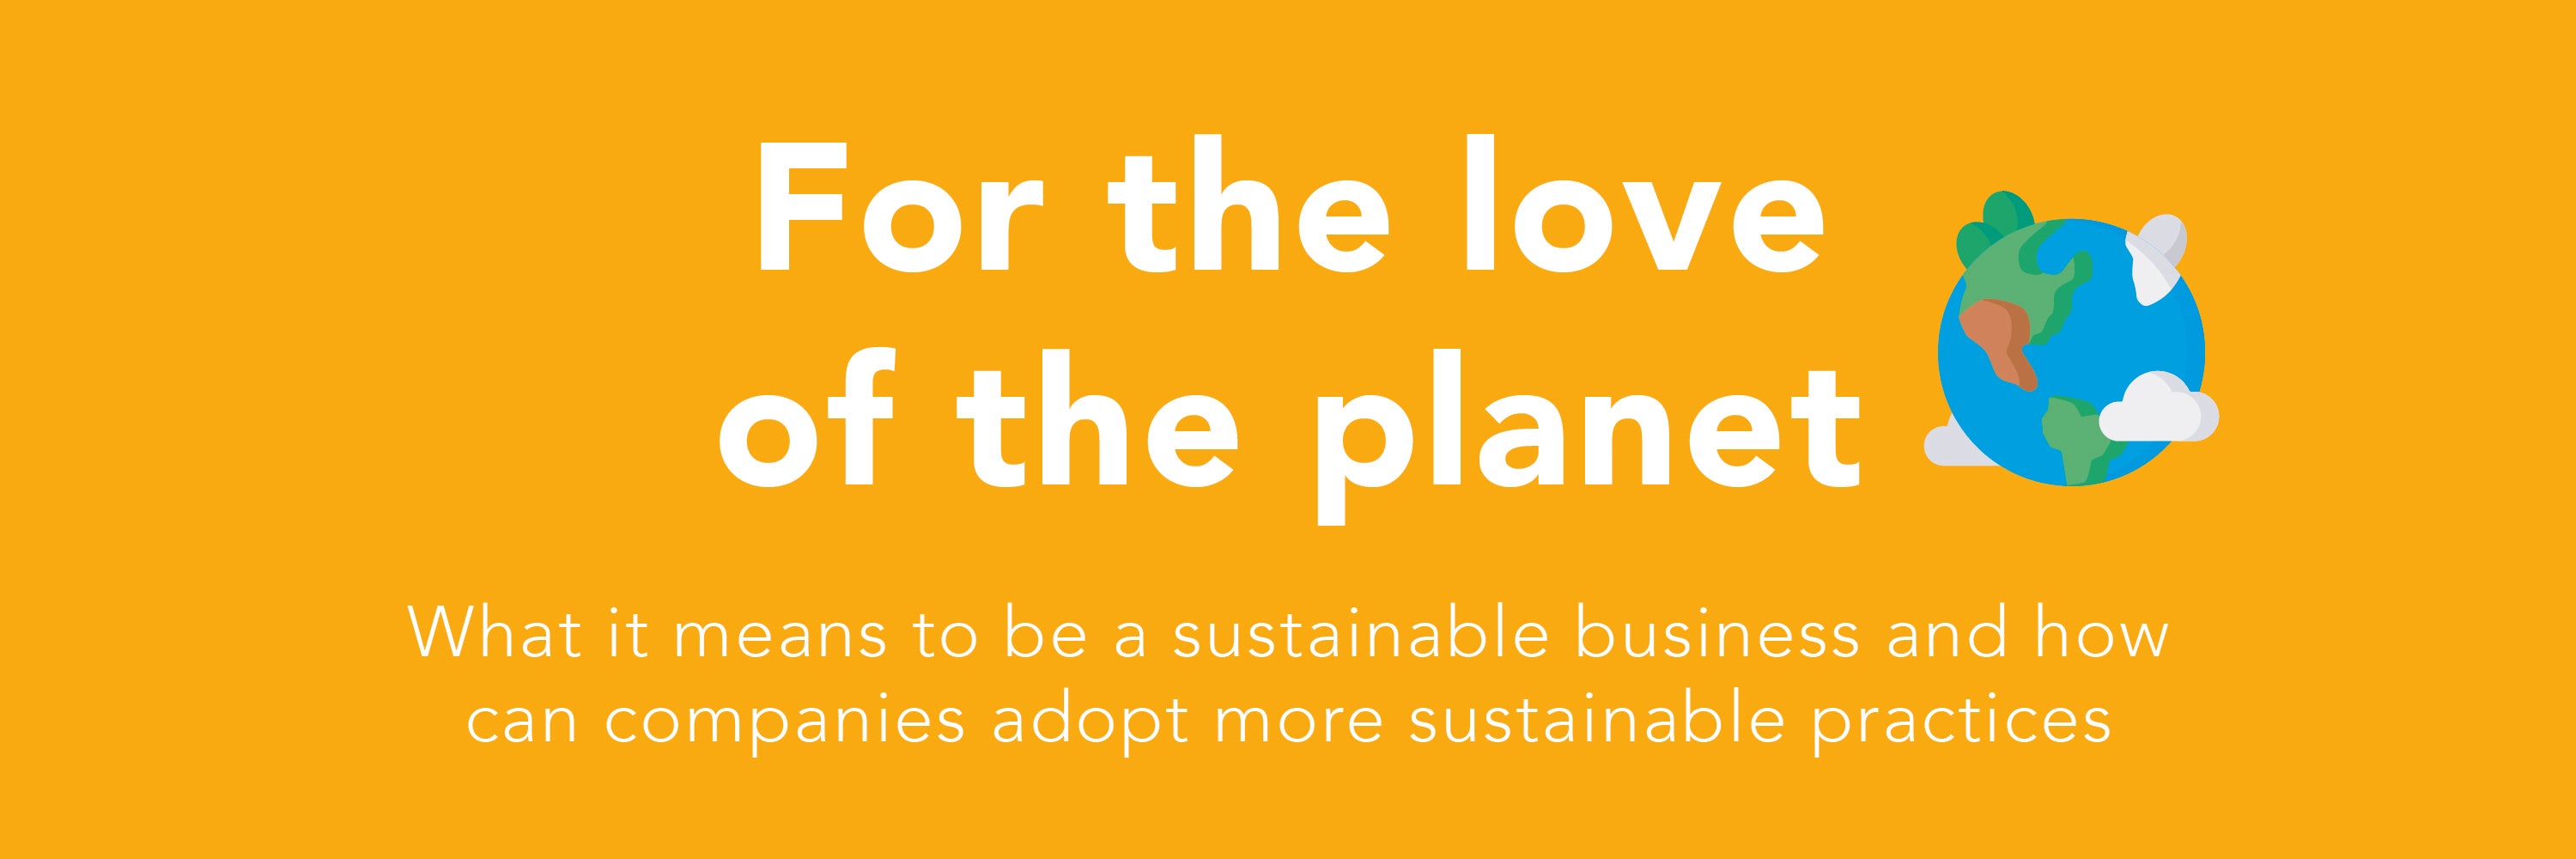 For the love  of the planet  What it means to be a sustainable business and how  can companies adopt more sustainable practices